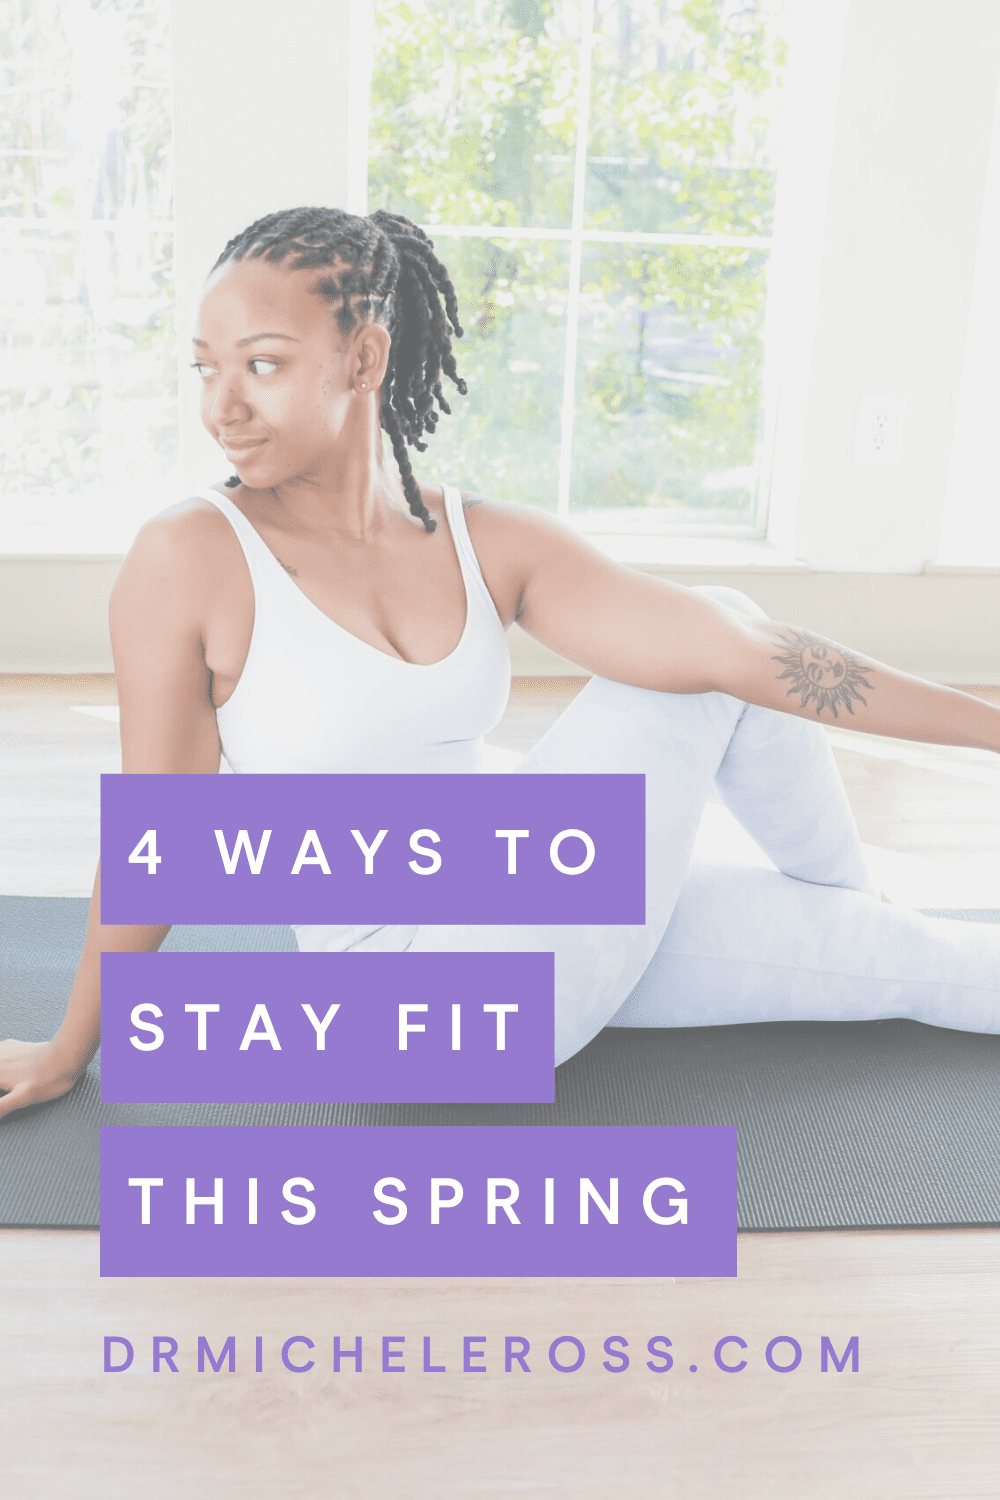 4 Ways To Stay Fit At Home This Spring